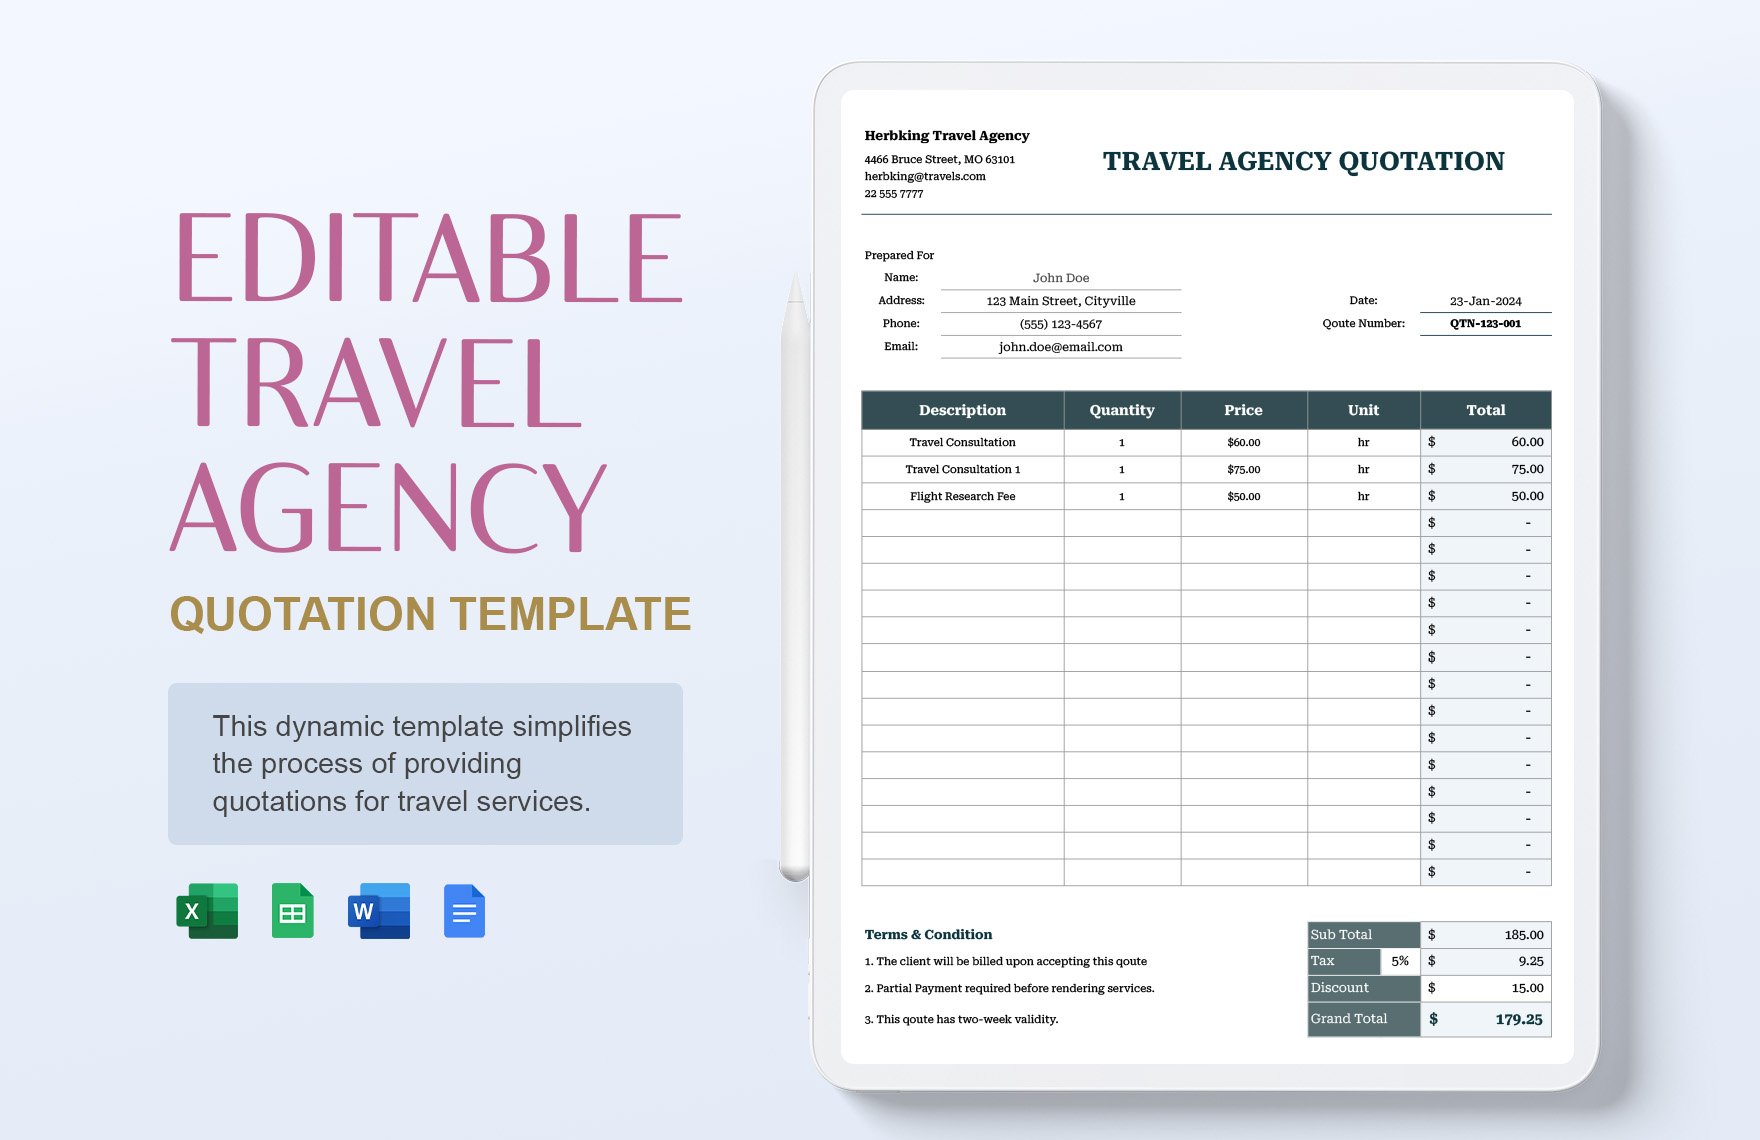 Editable Travel Agency Quotation Template